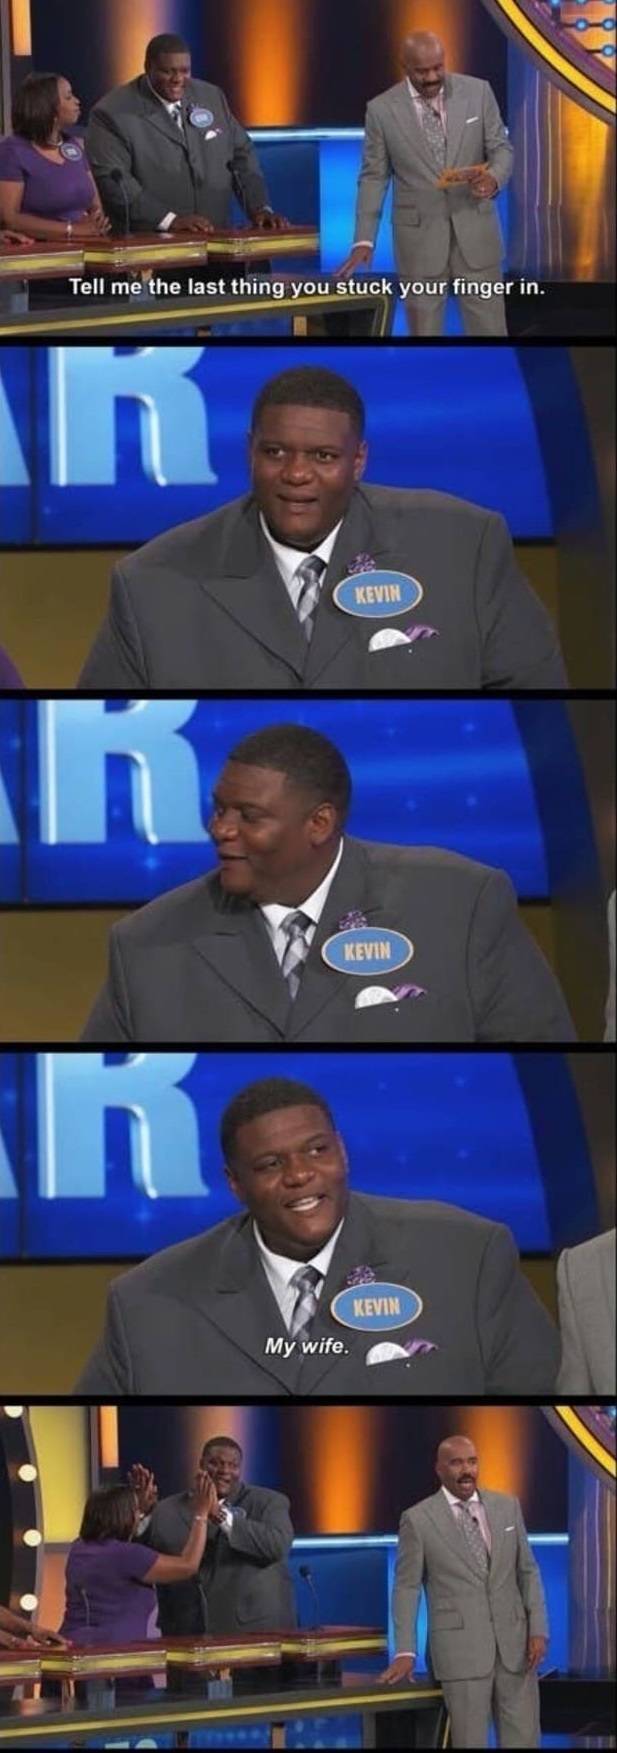 dumbest family feud answers - Tell me the last thing you stuck your finger in. Kevin Kevin Kevin My wife.